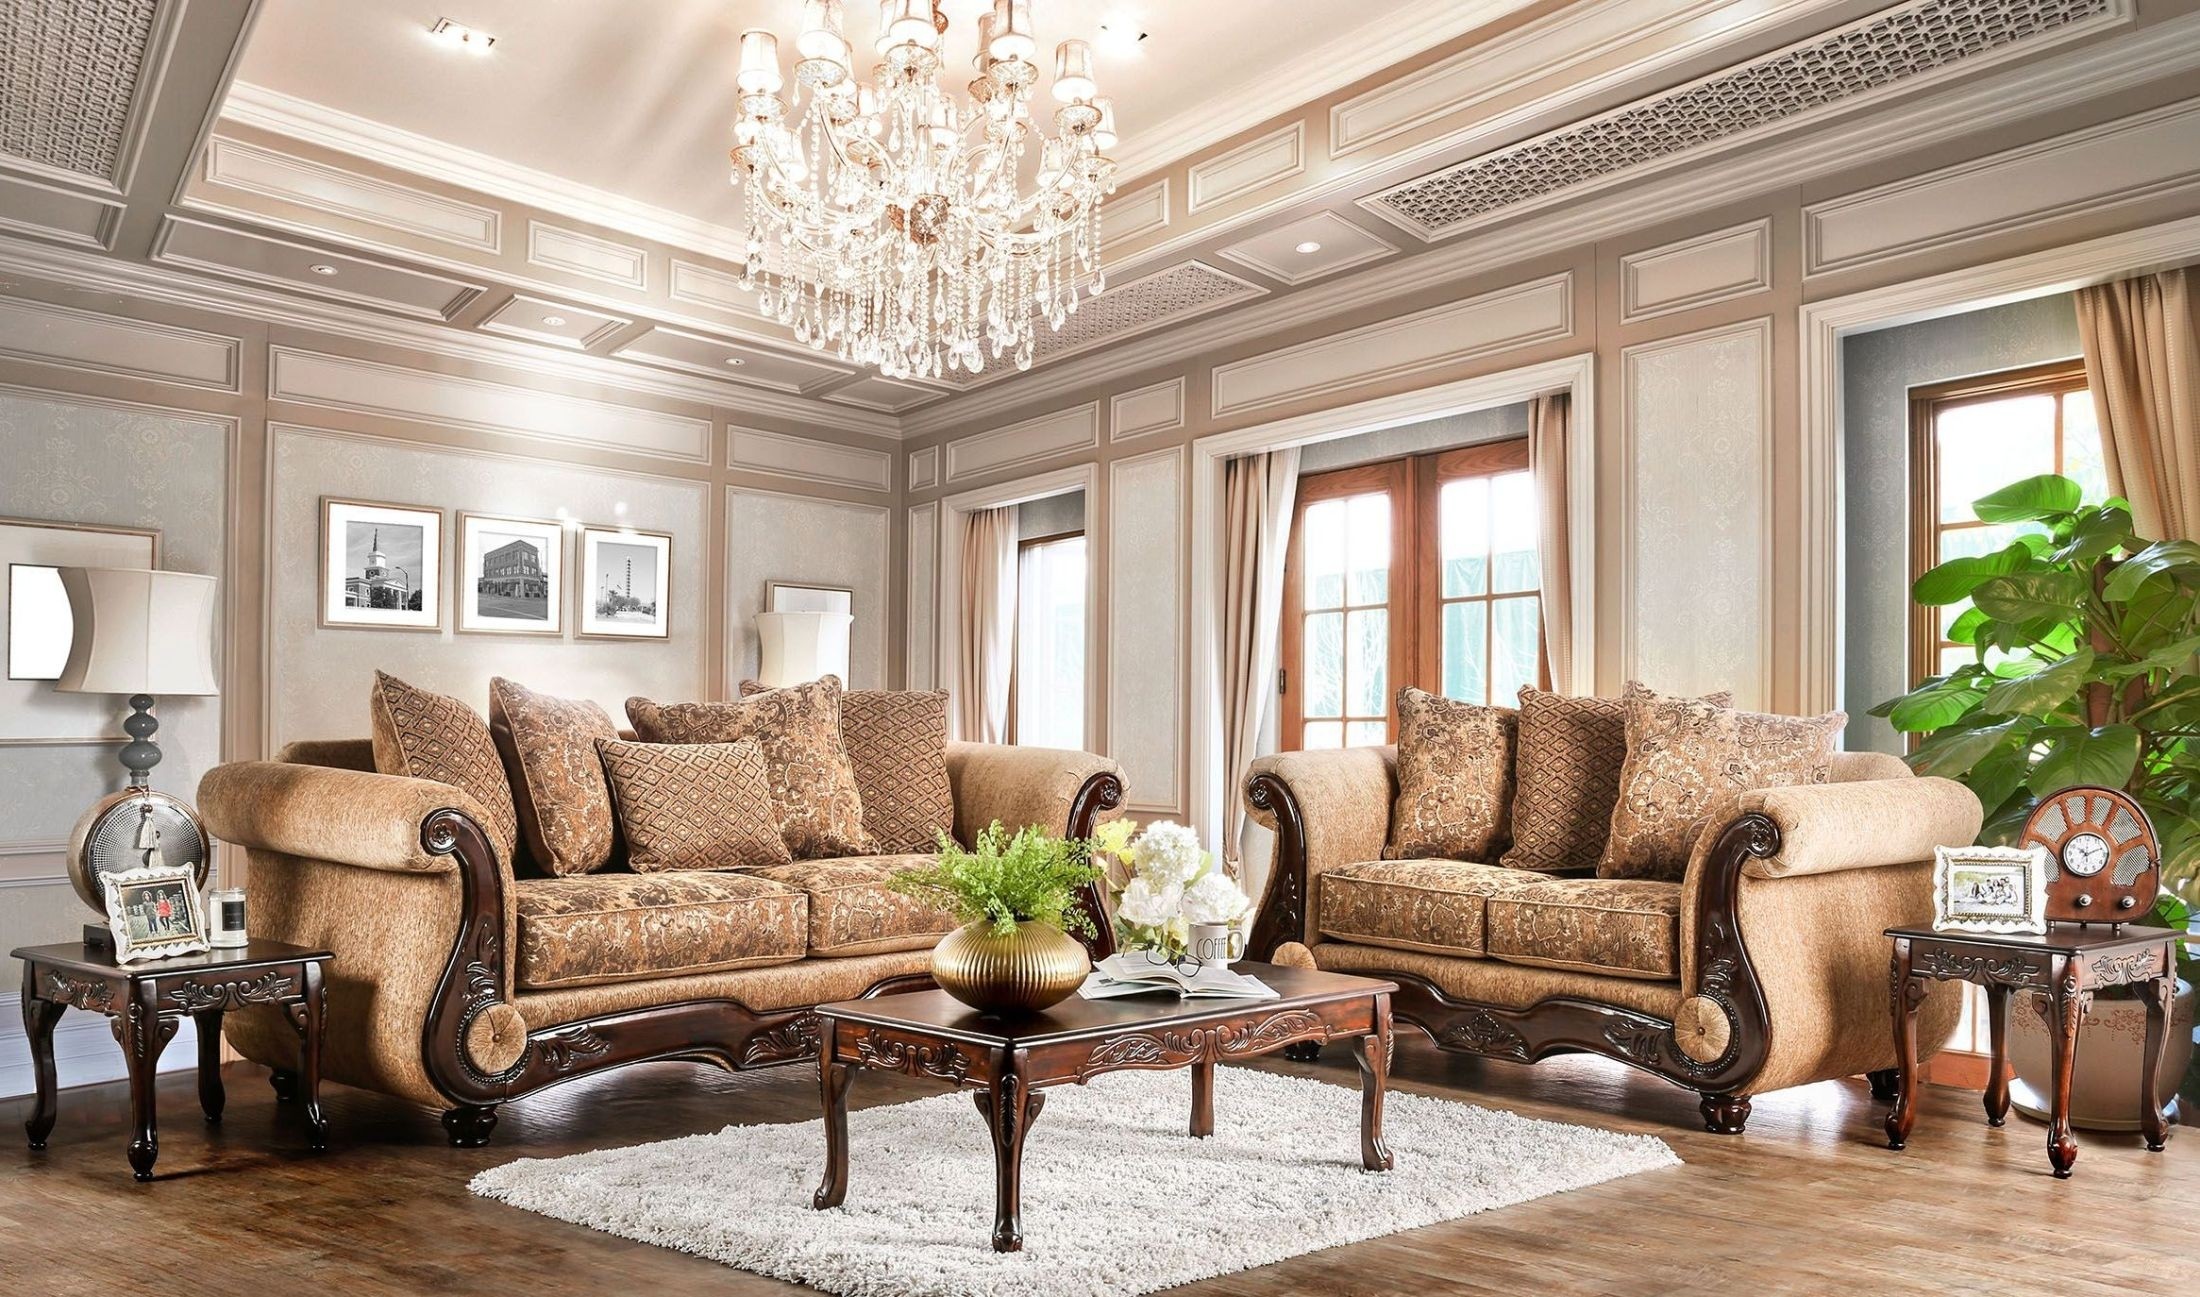 Furniture of america nicanor tan and gold living room set